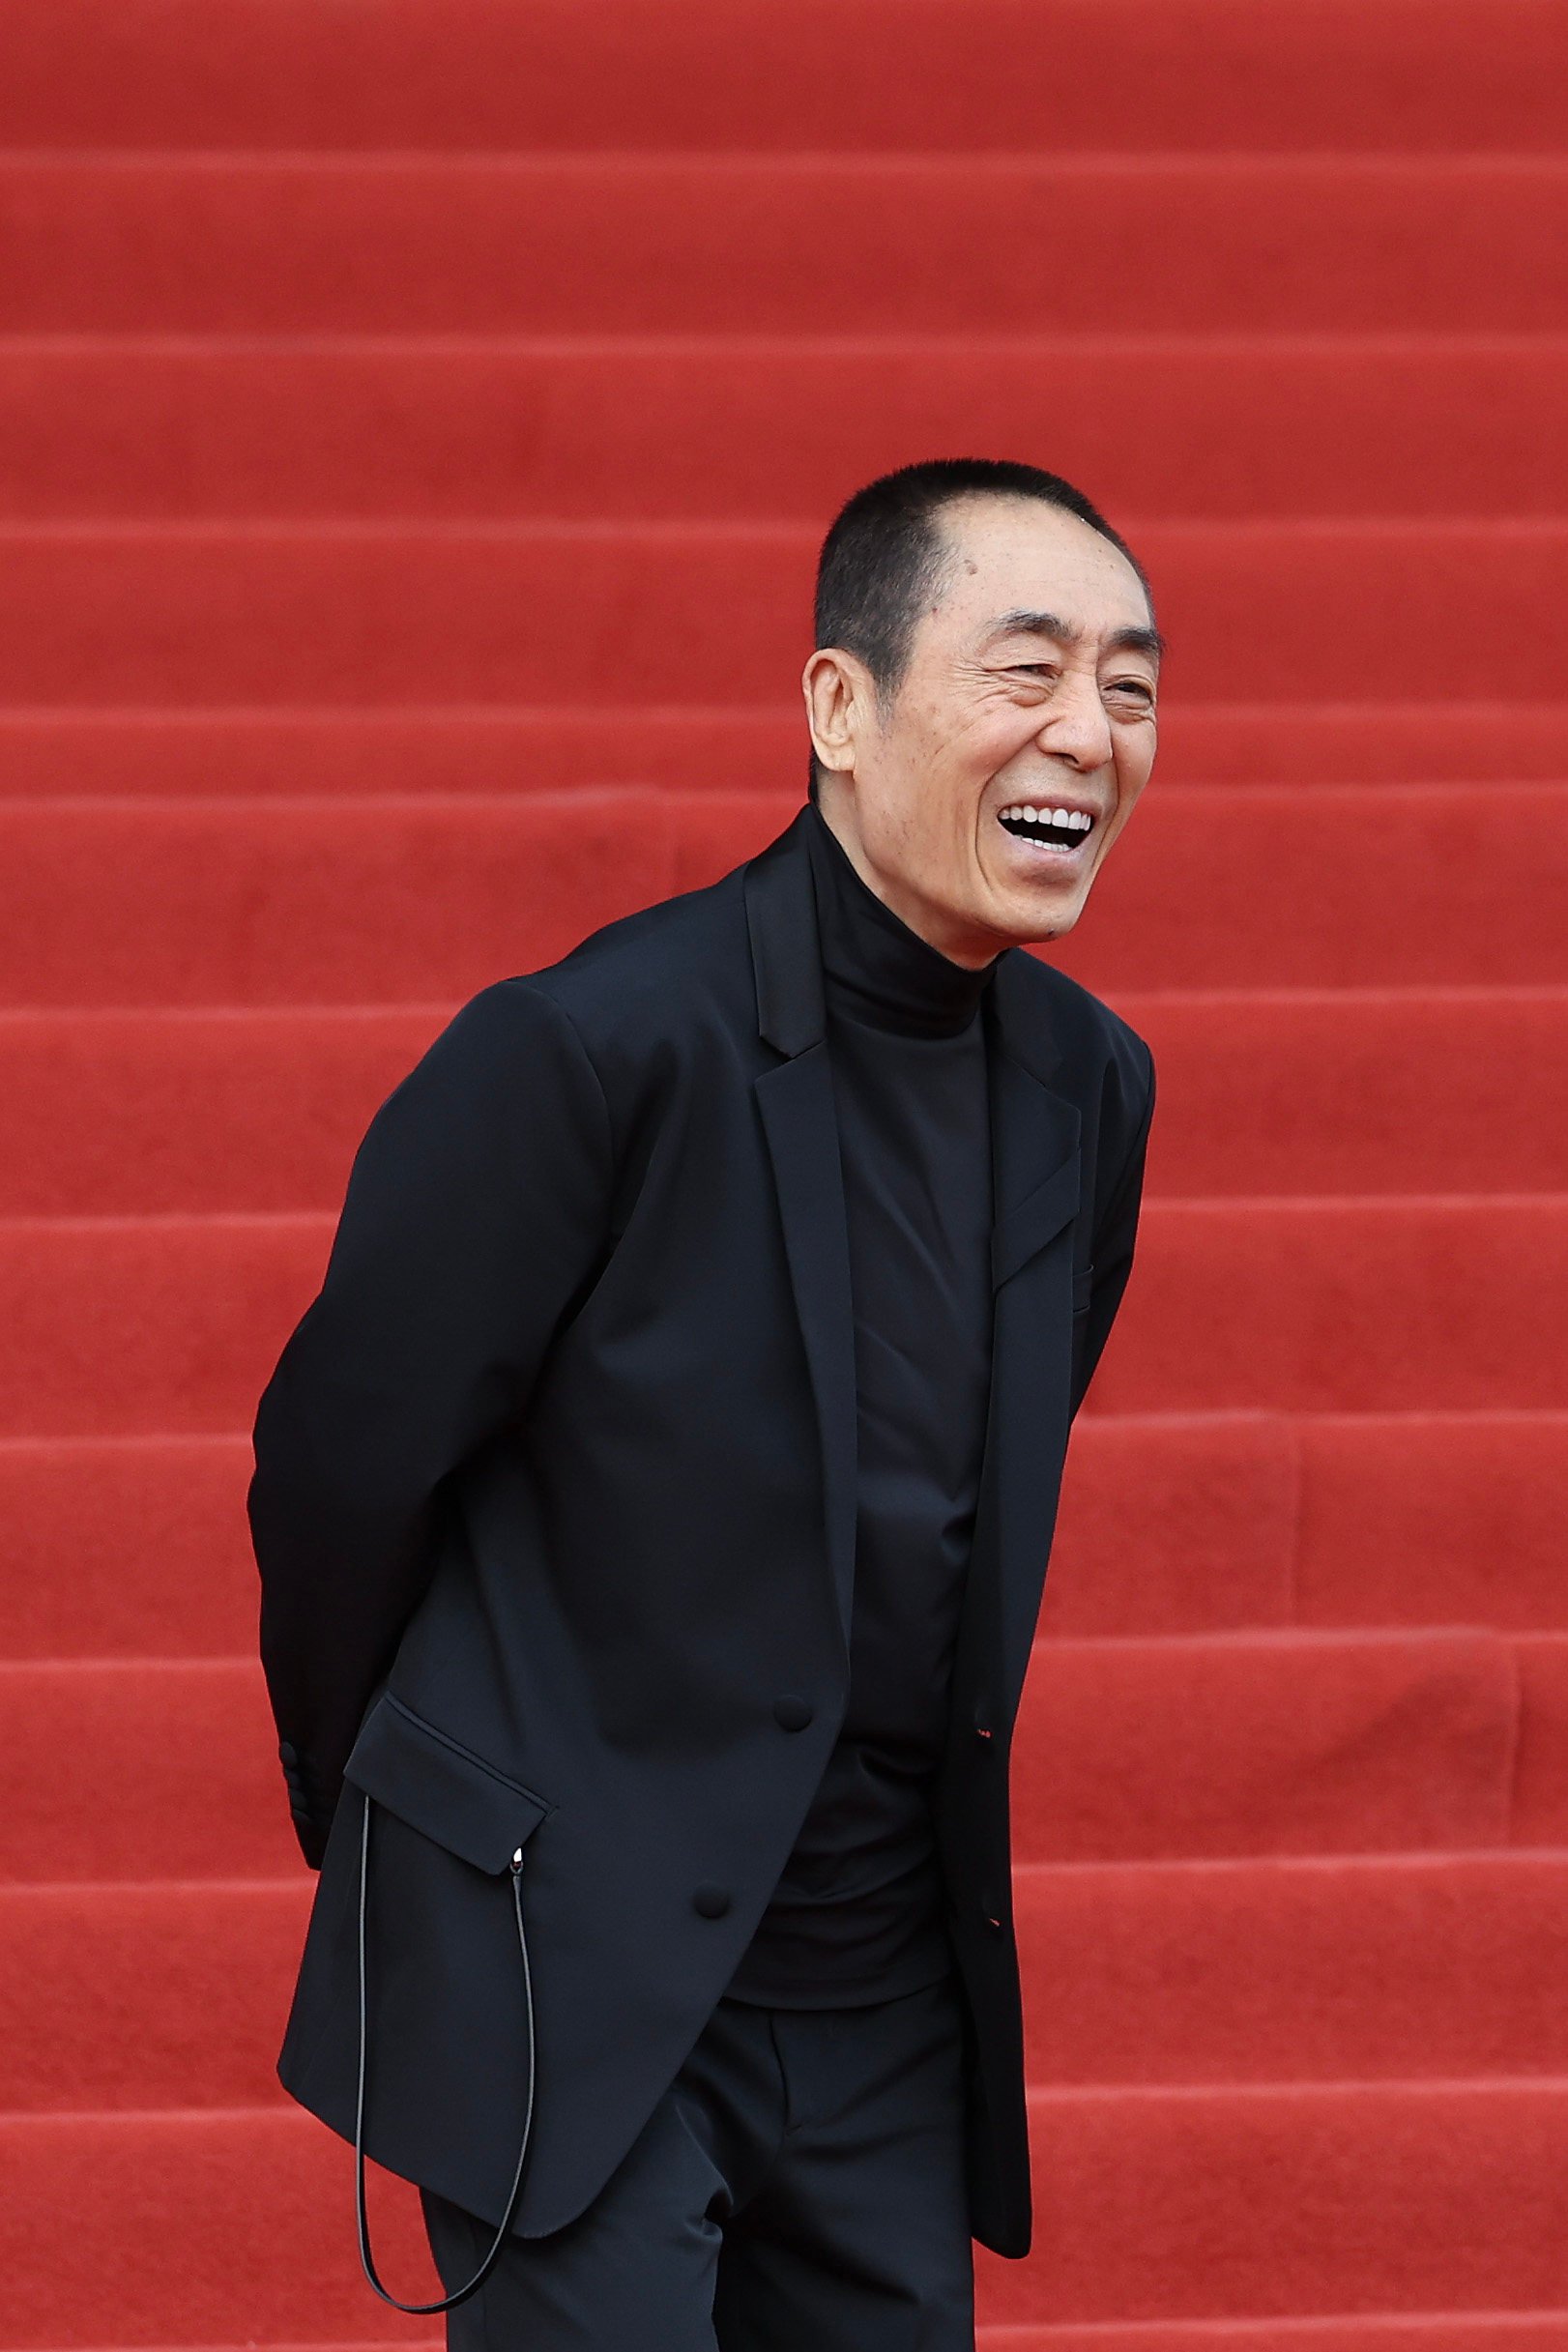 Director Zhang Yimou (above) introduced Zhang Ziyi to the world, made Gong Li his muse, and gave us art-house films, martial arts epics and quirky comedies. Photo: Getty Images